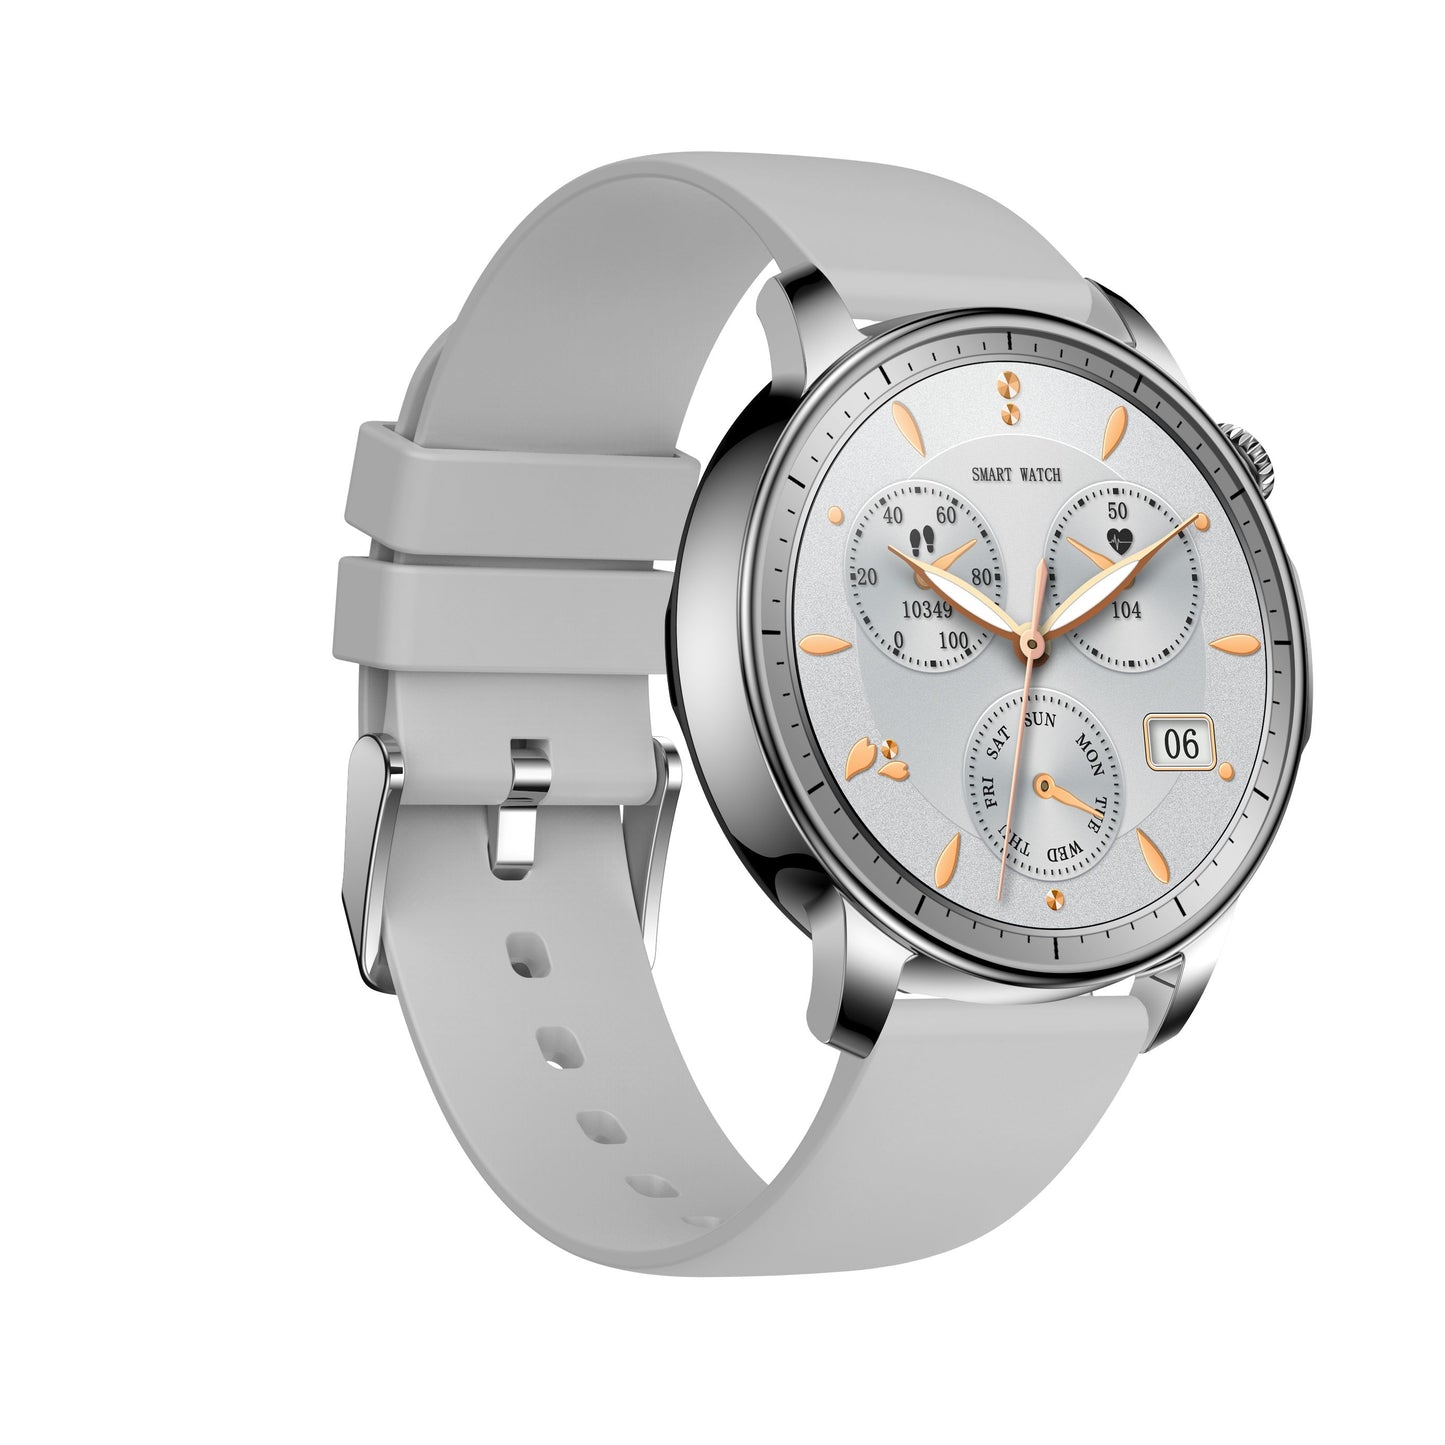 Smart watch COLMI V65 silver right view